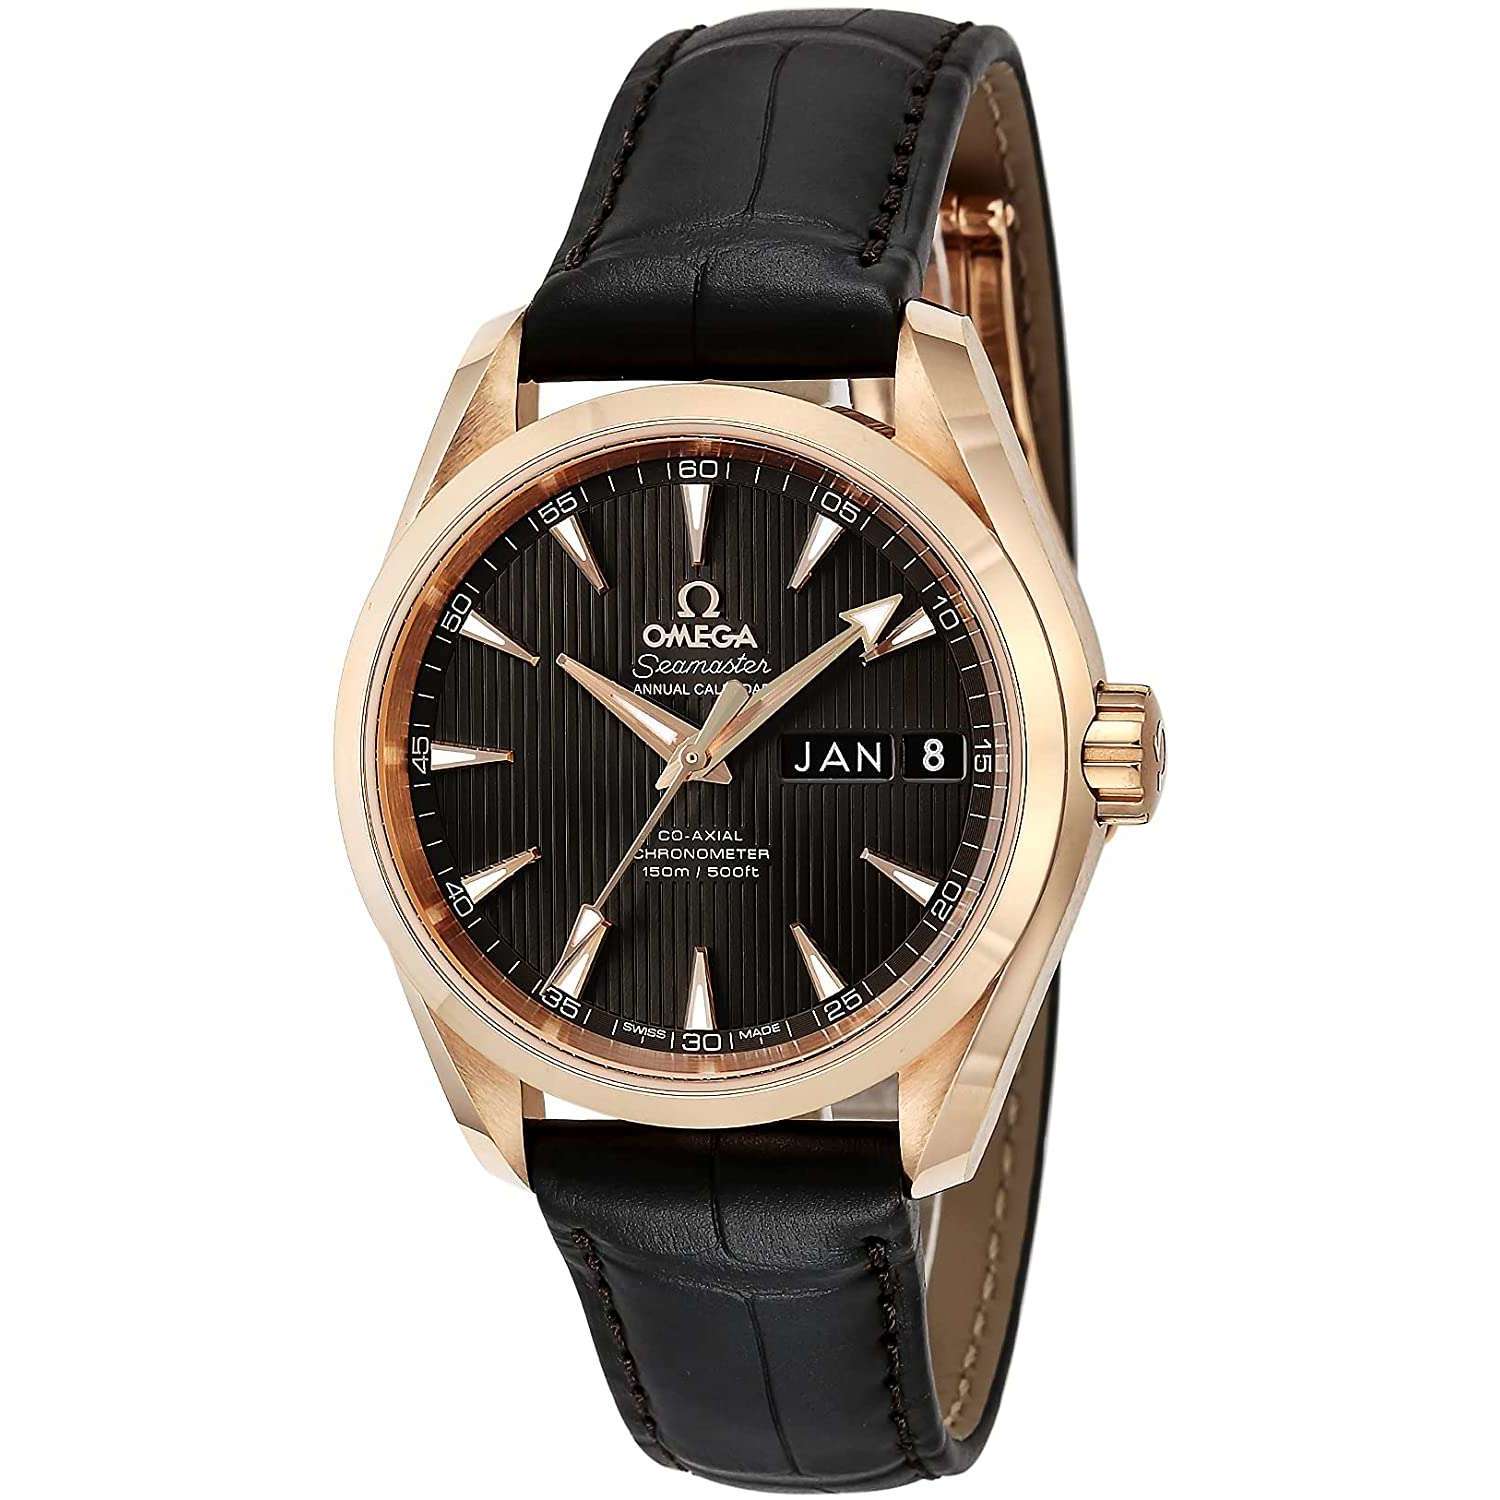 ROOK JAPAN:OMEGA SEAMASTER ANNUAL CALENDAR CO-AXIAL CHRONOMETER 39 MM MEN WATCH 231.53.39.22.06.001,Luxury Watch,Omega